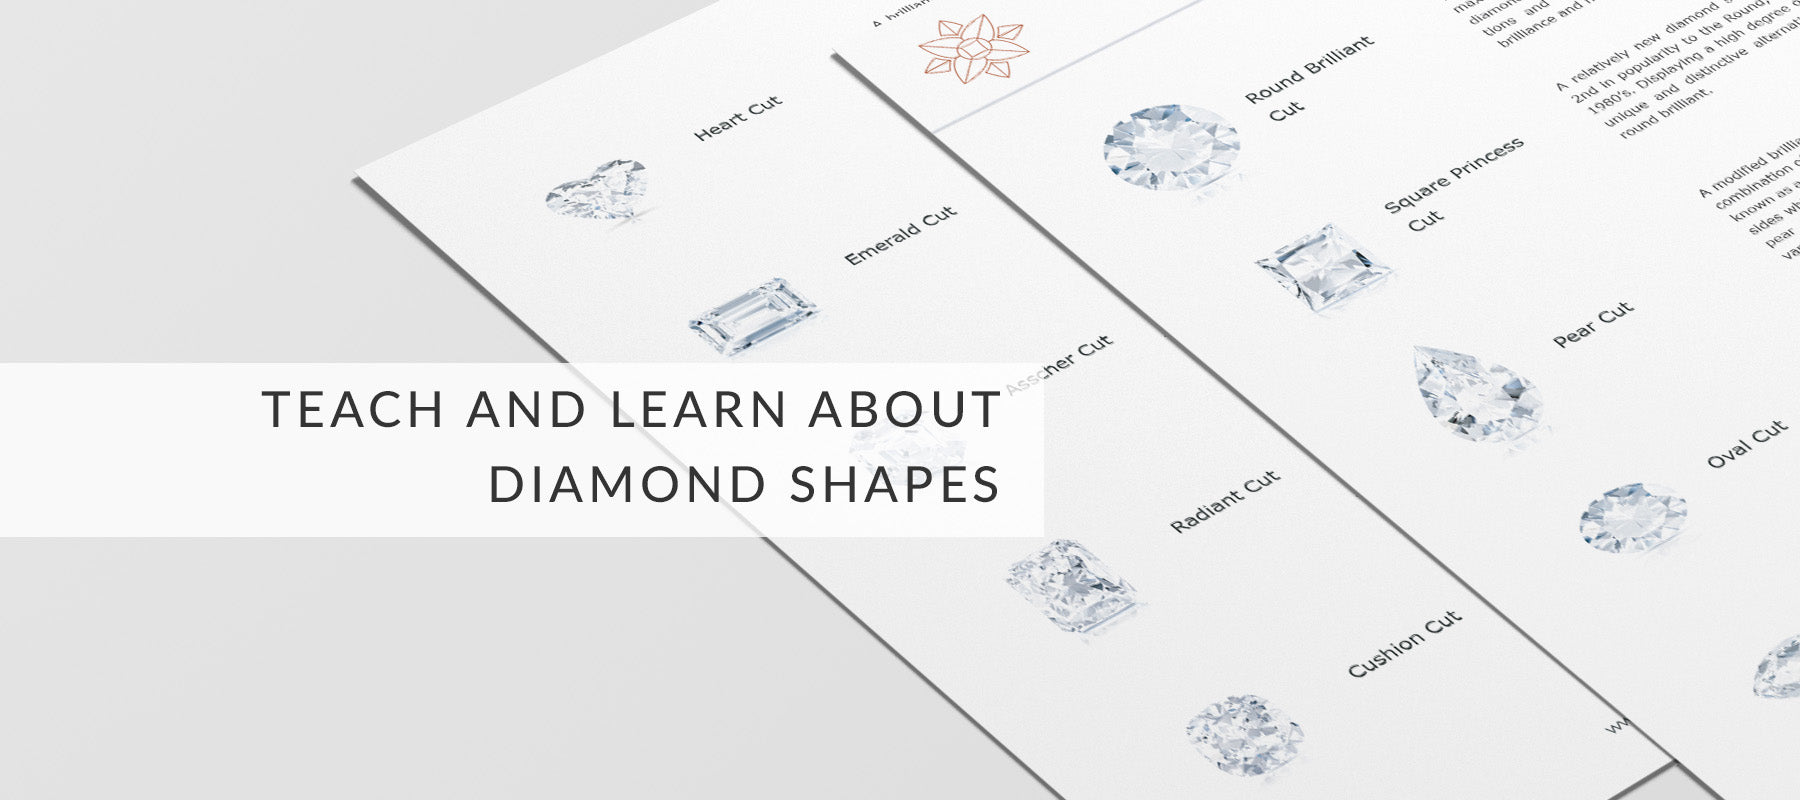 diamond cuts and shapes for education and learning